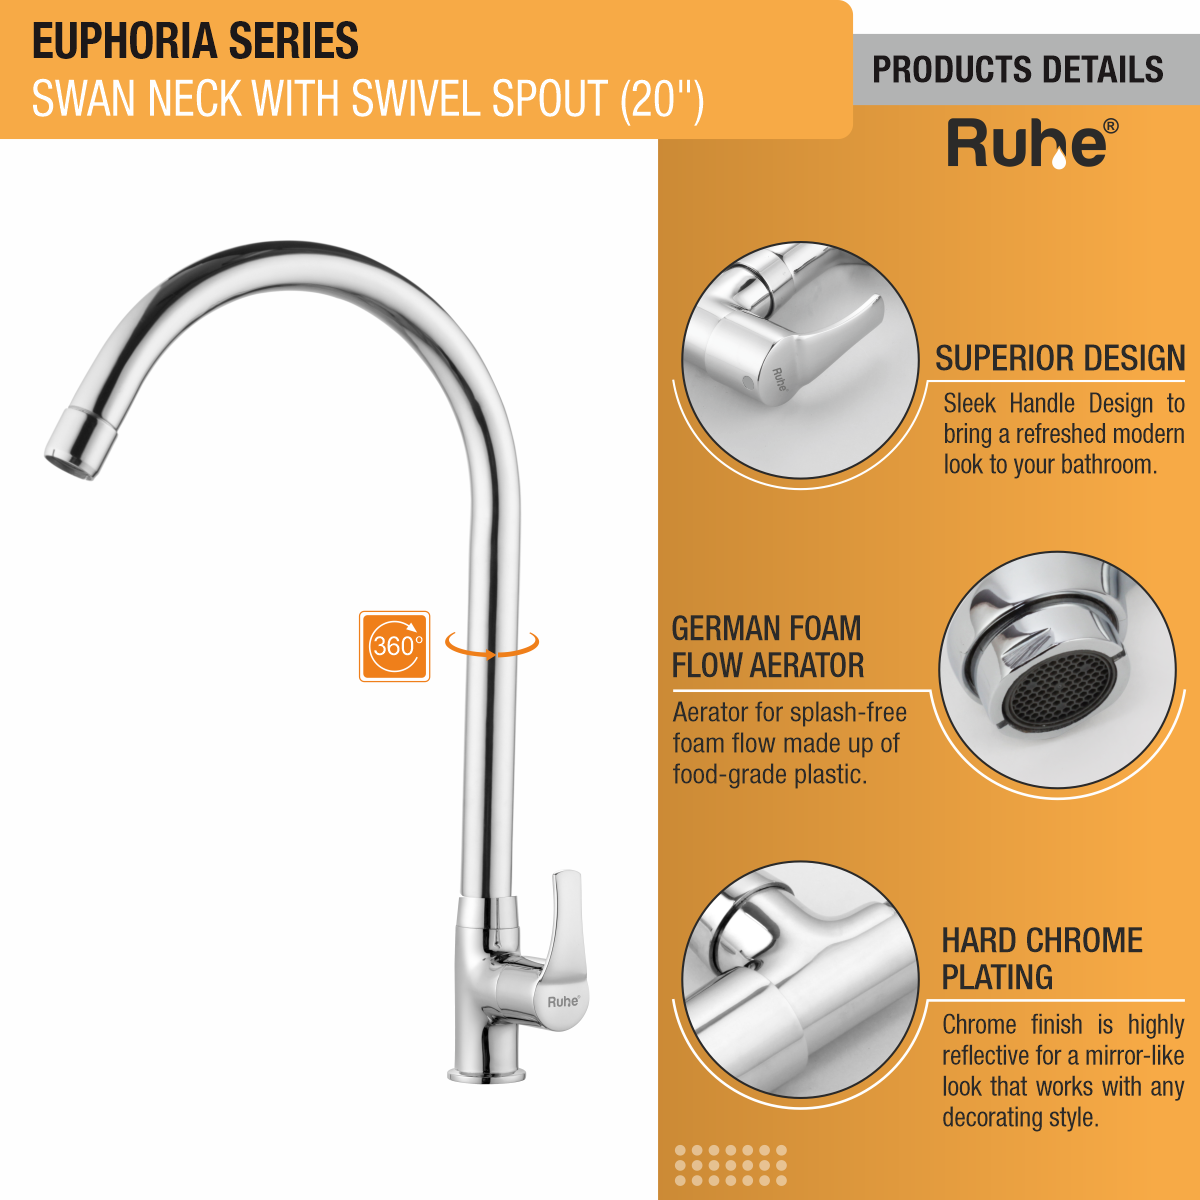 Euphoria Swan Neck with Large (20 inches) Round Swivel Spout Faucet product details